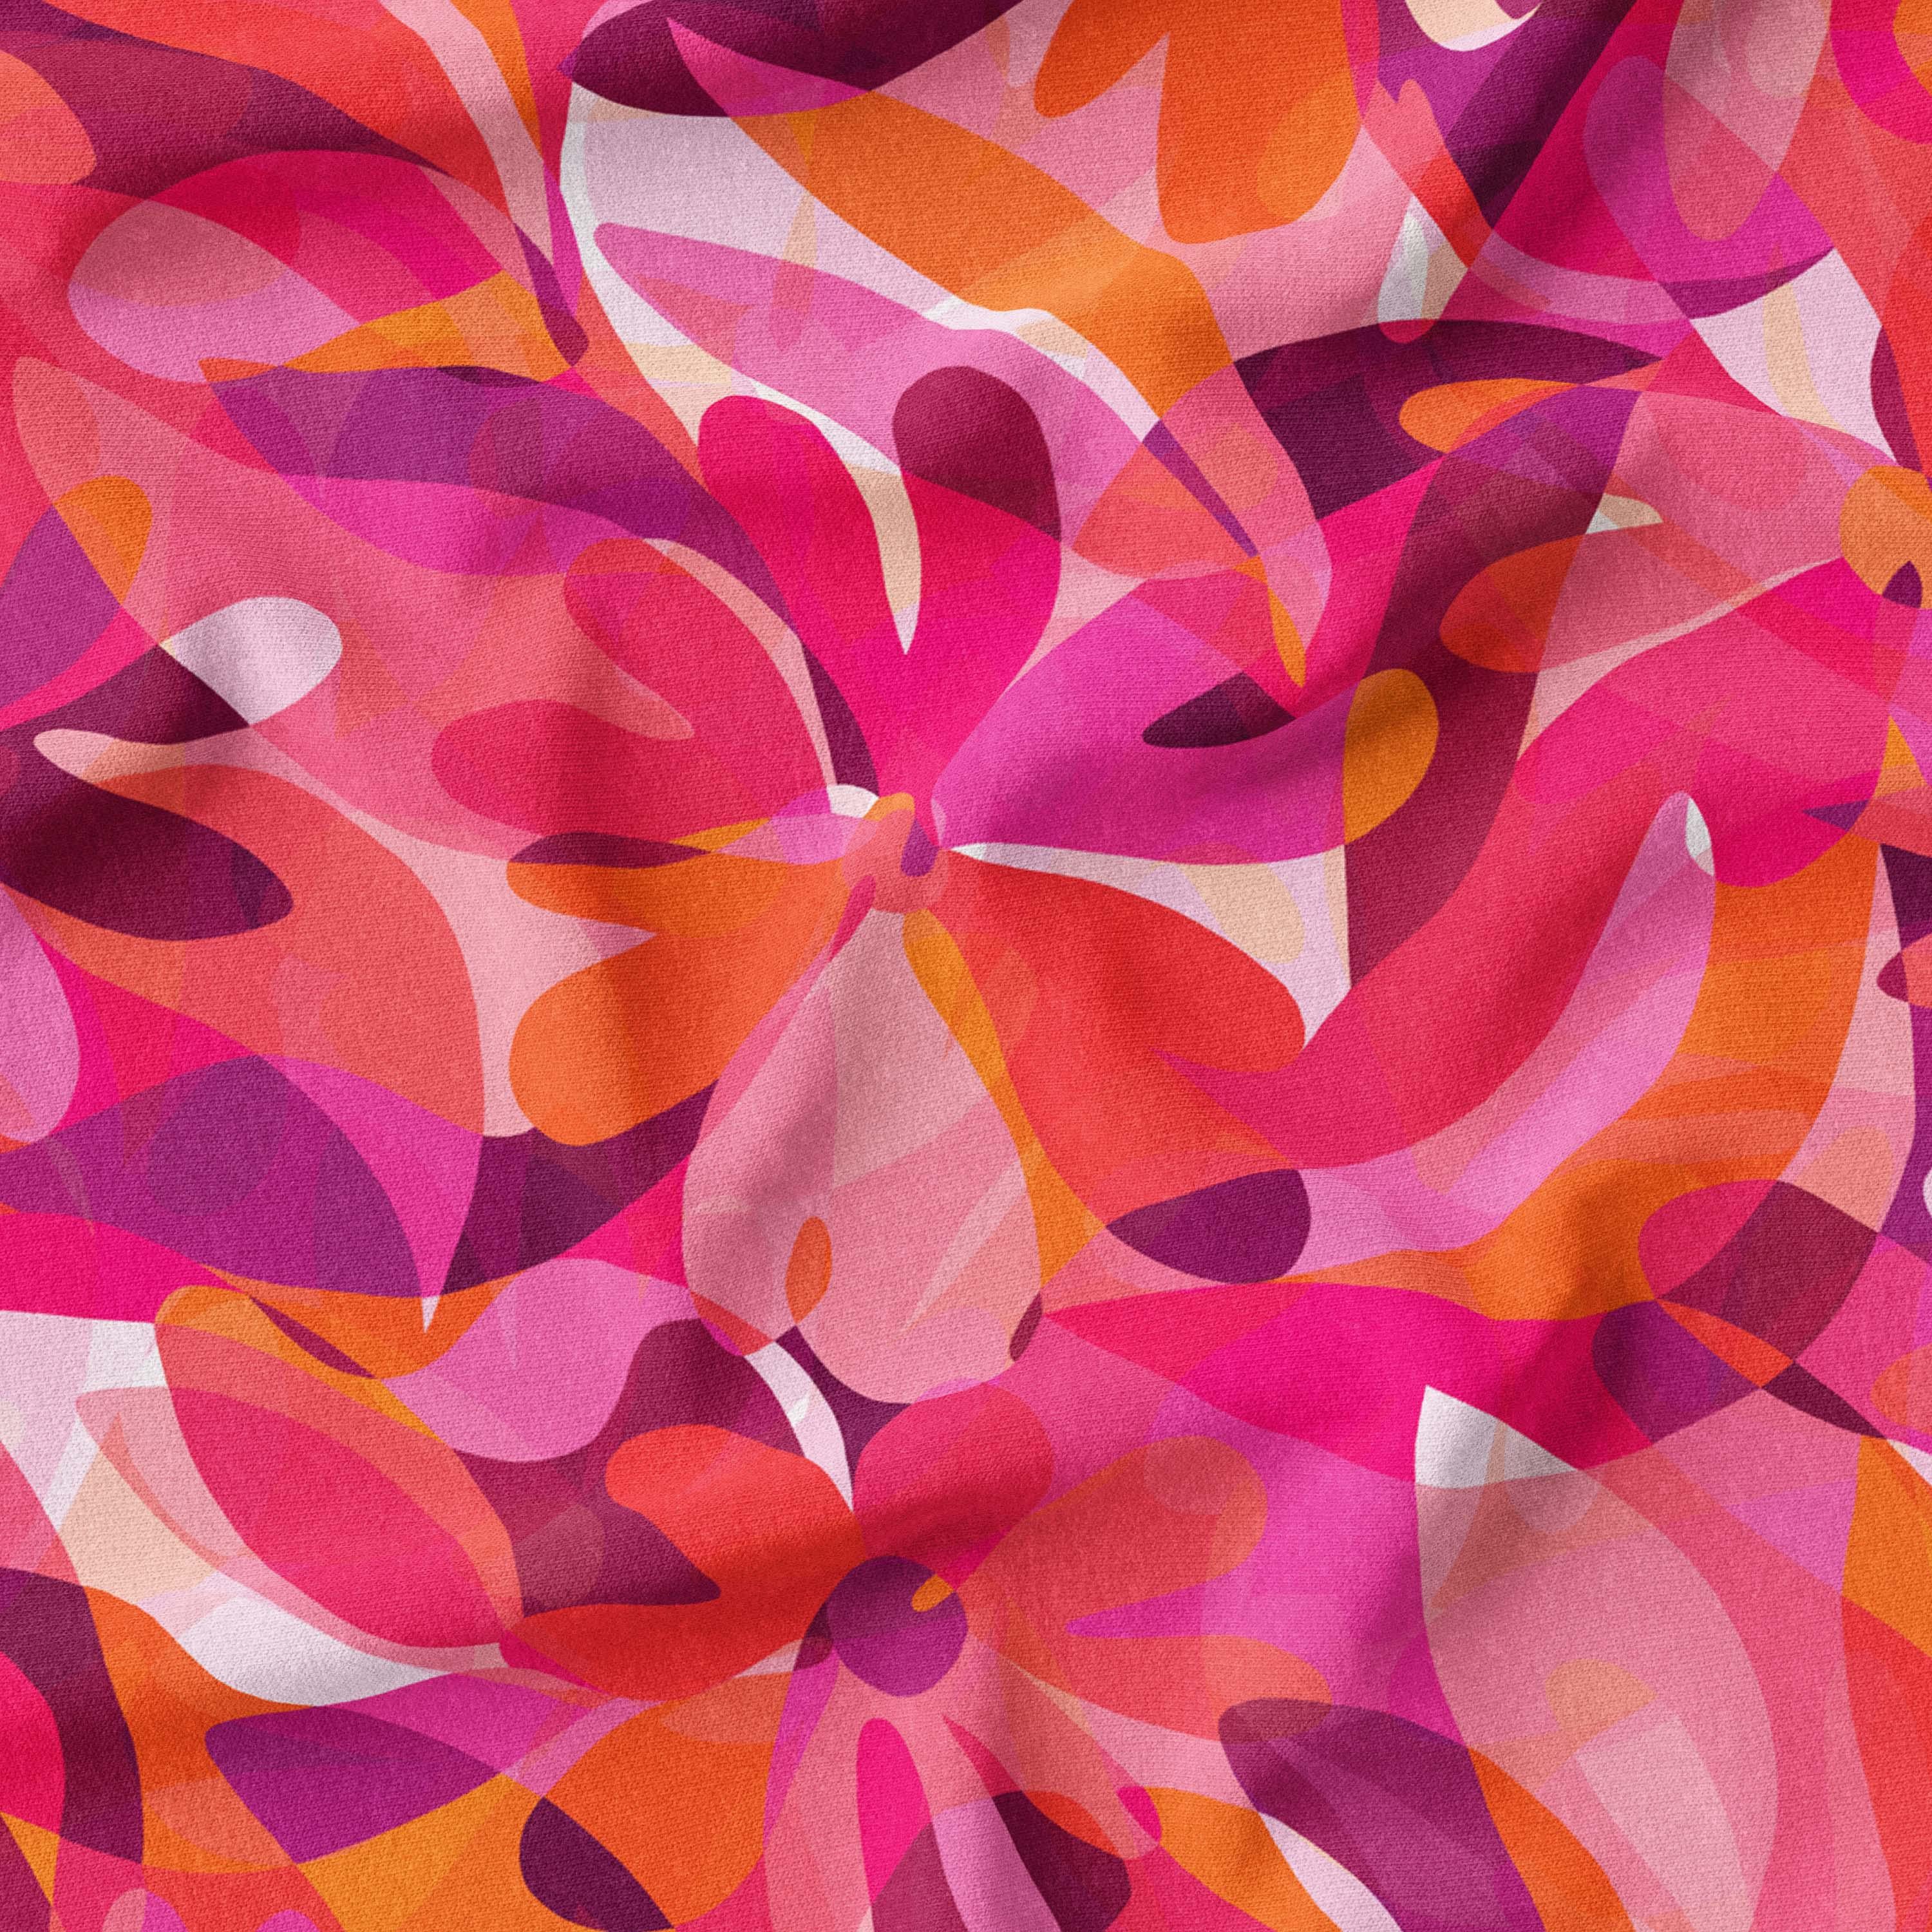 Best-selling 'Fireside' fabric with a vibrant blend of red, pink, and orange abstract floral patterns, available for custom print